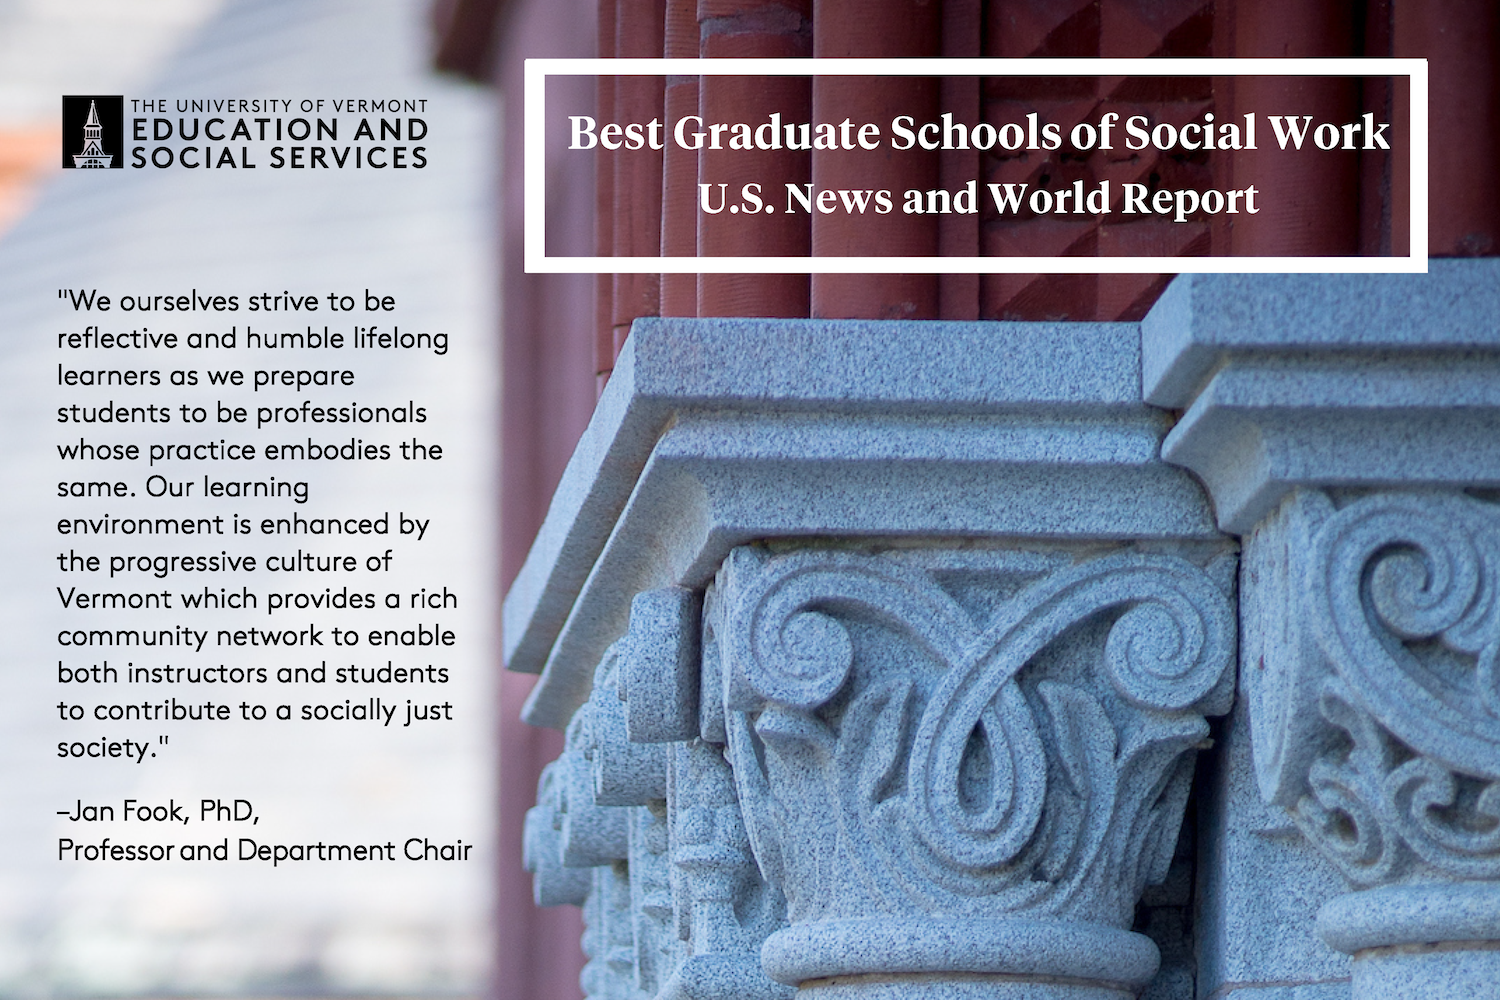 UVM recognized as one of the Best Graduate Schools of Social Work by U.S. News and World Report